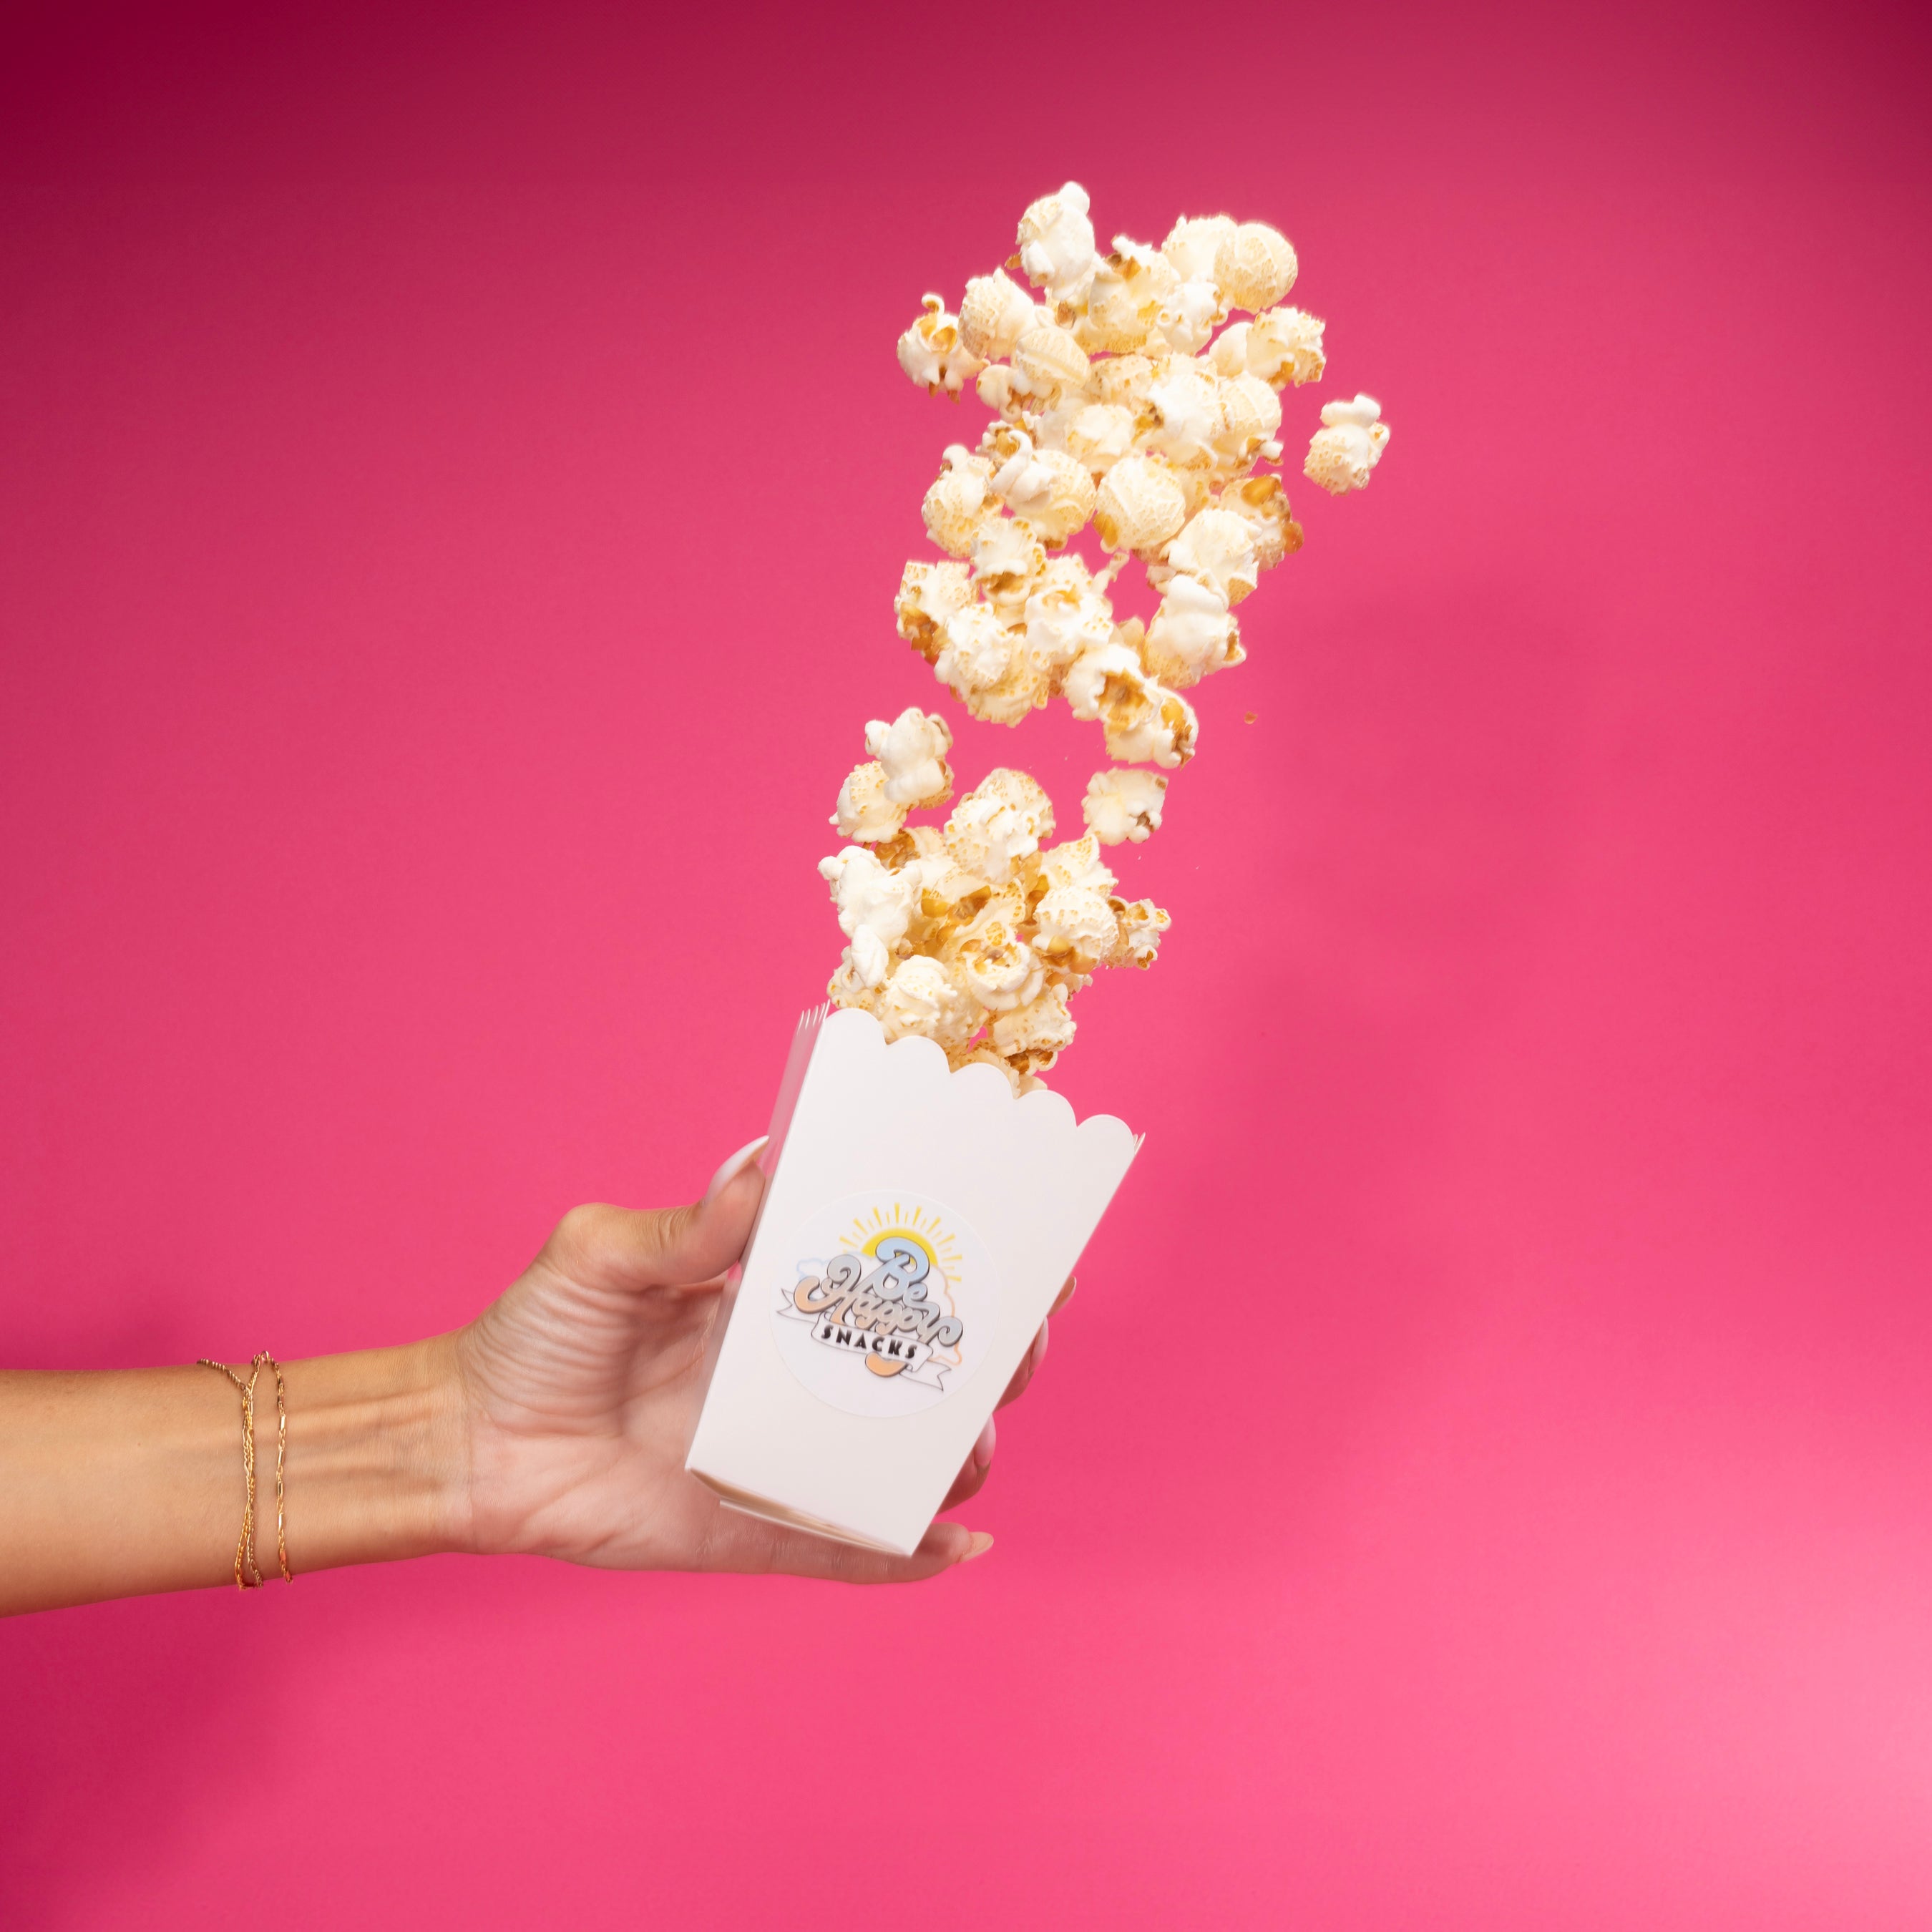 Popcorn pouring out of a popcorn cup